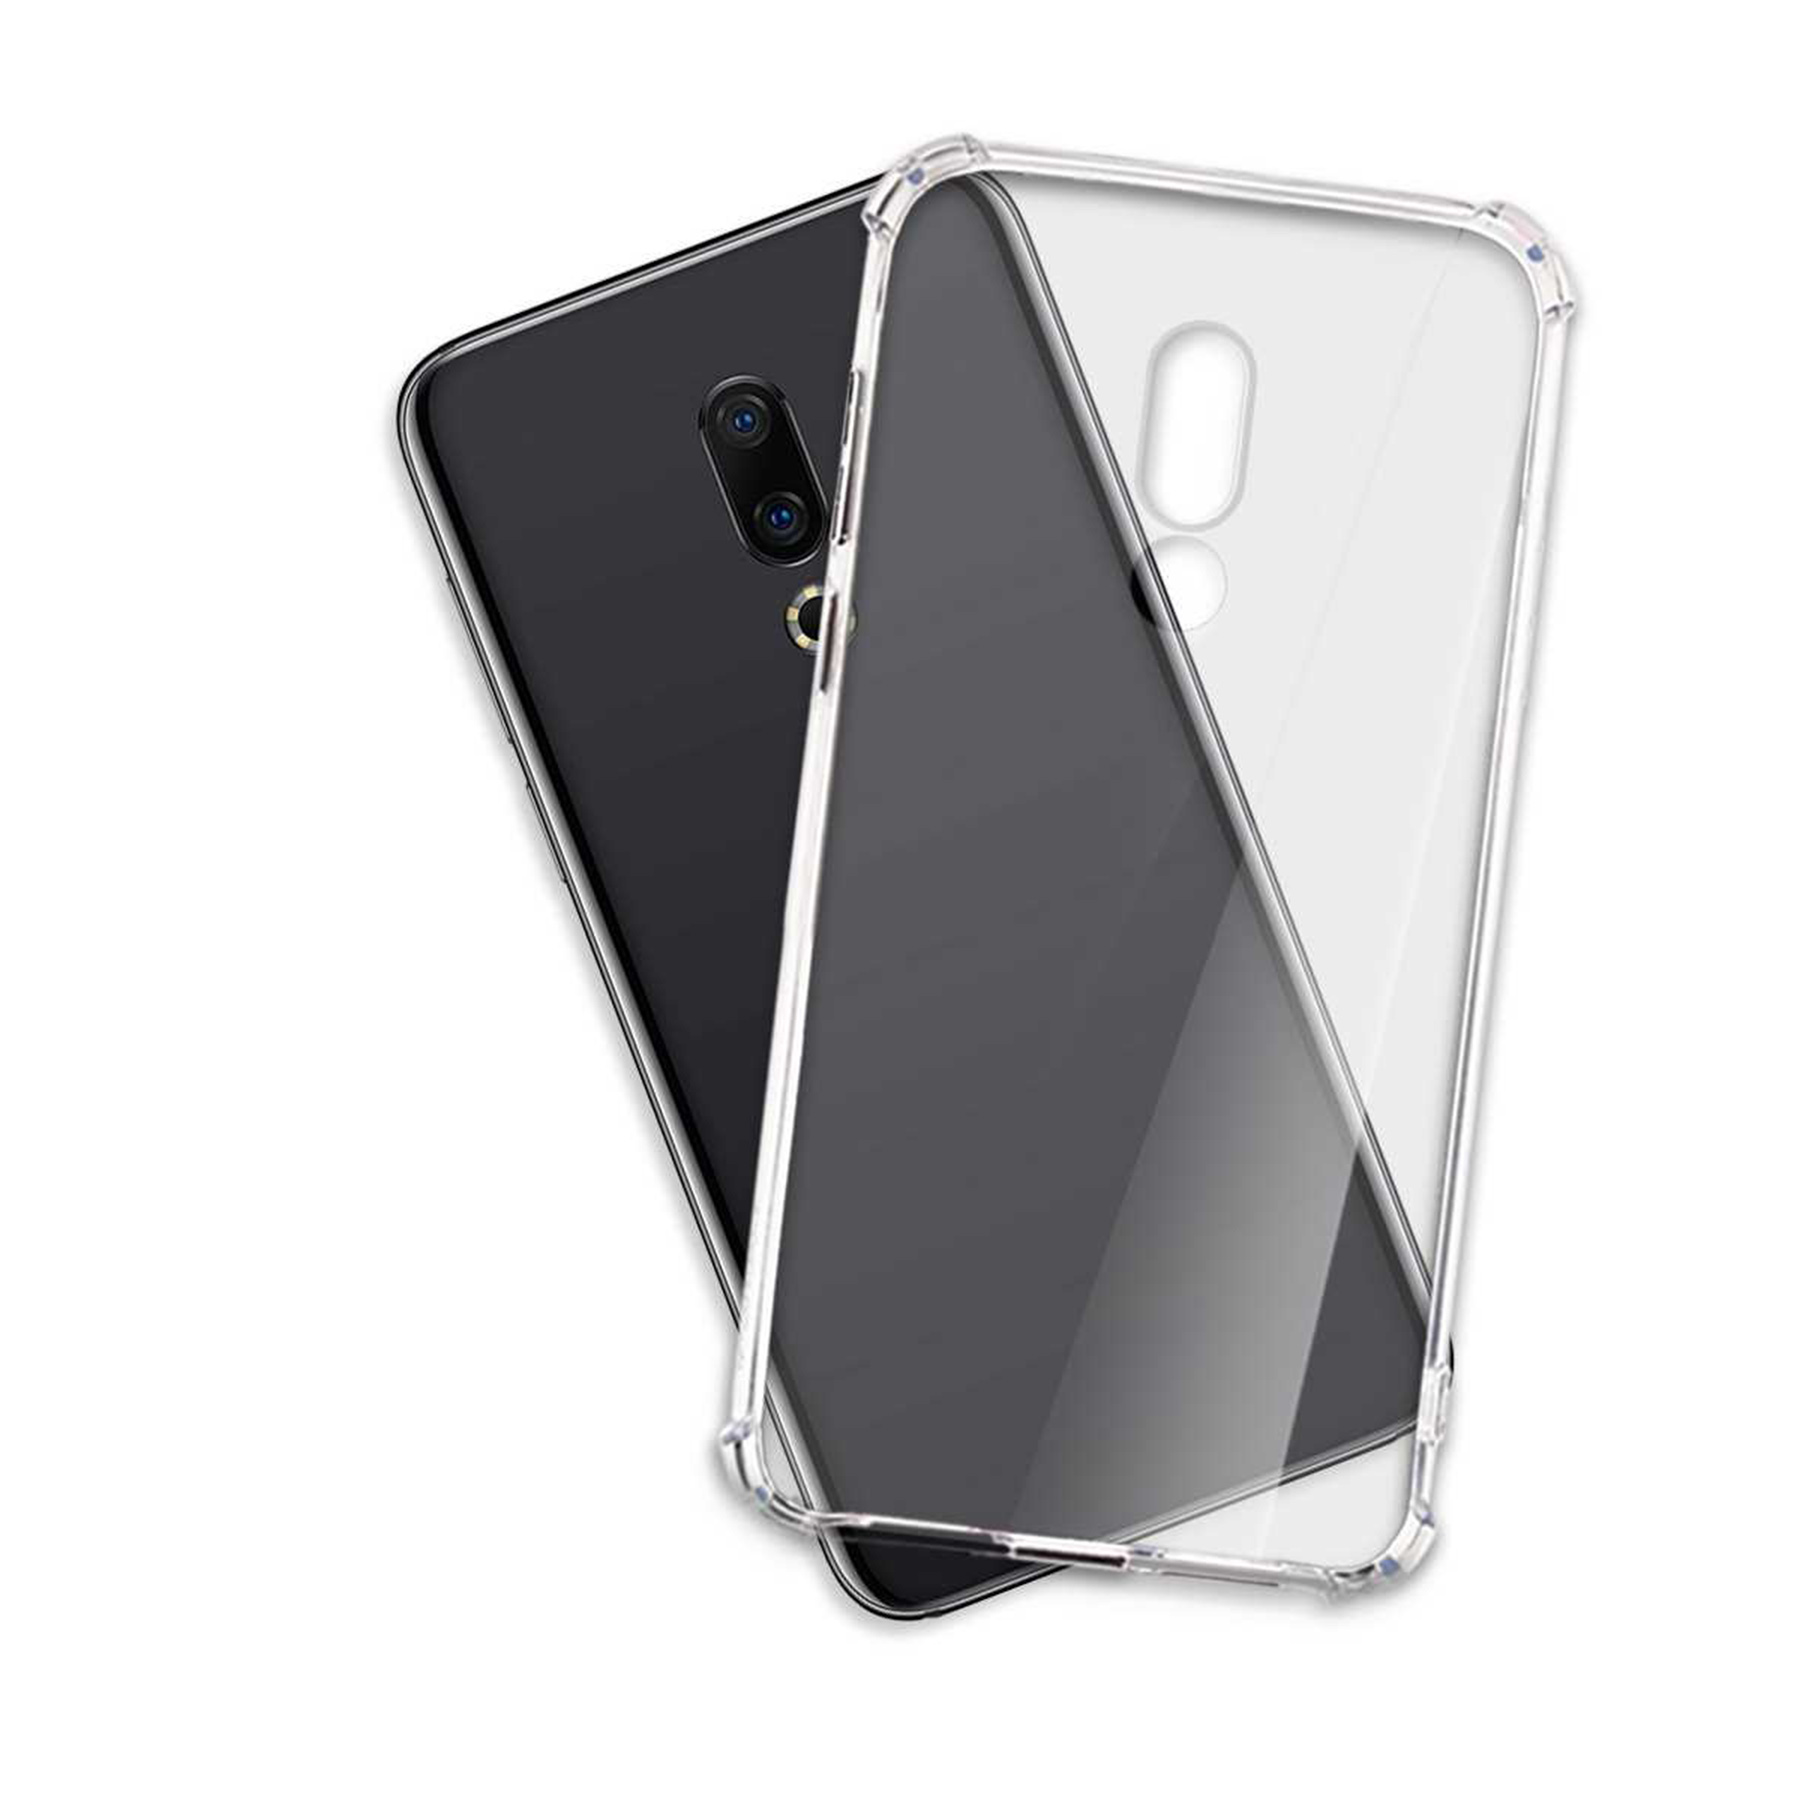 MTB MORE Clear Transparent Pro, 16 16TH, Backcover, ENERGY 16, Case, Meizu, Armor